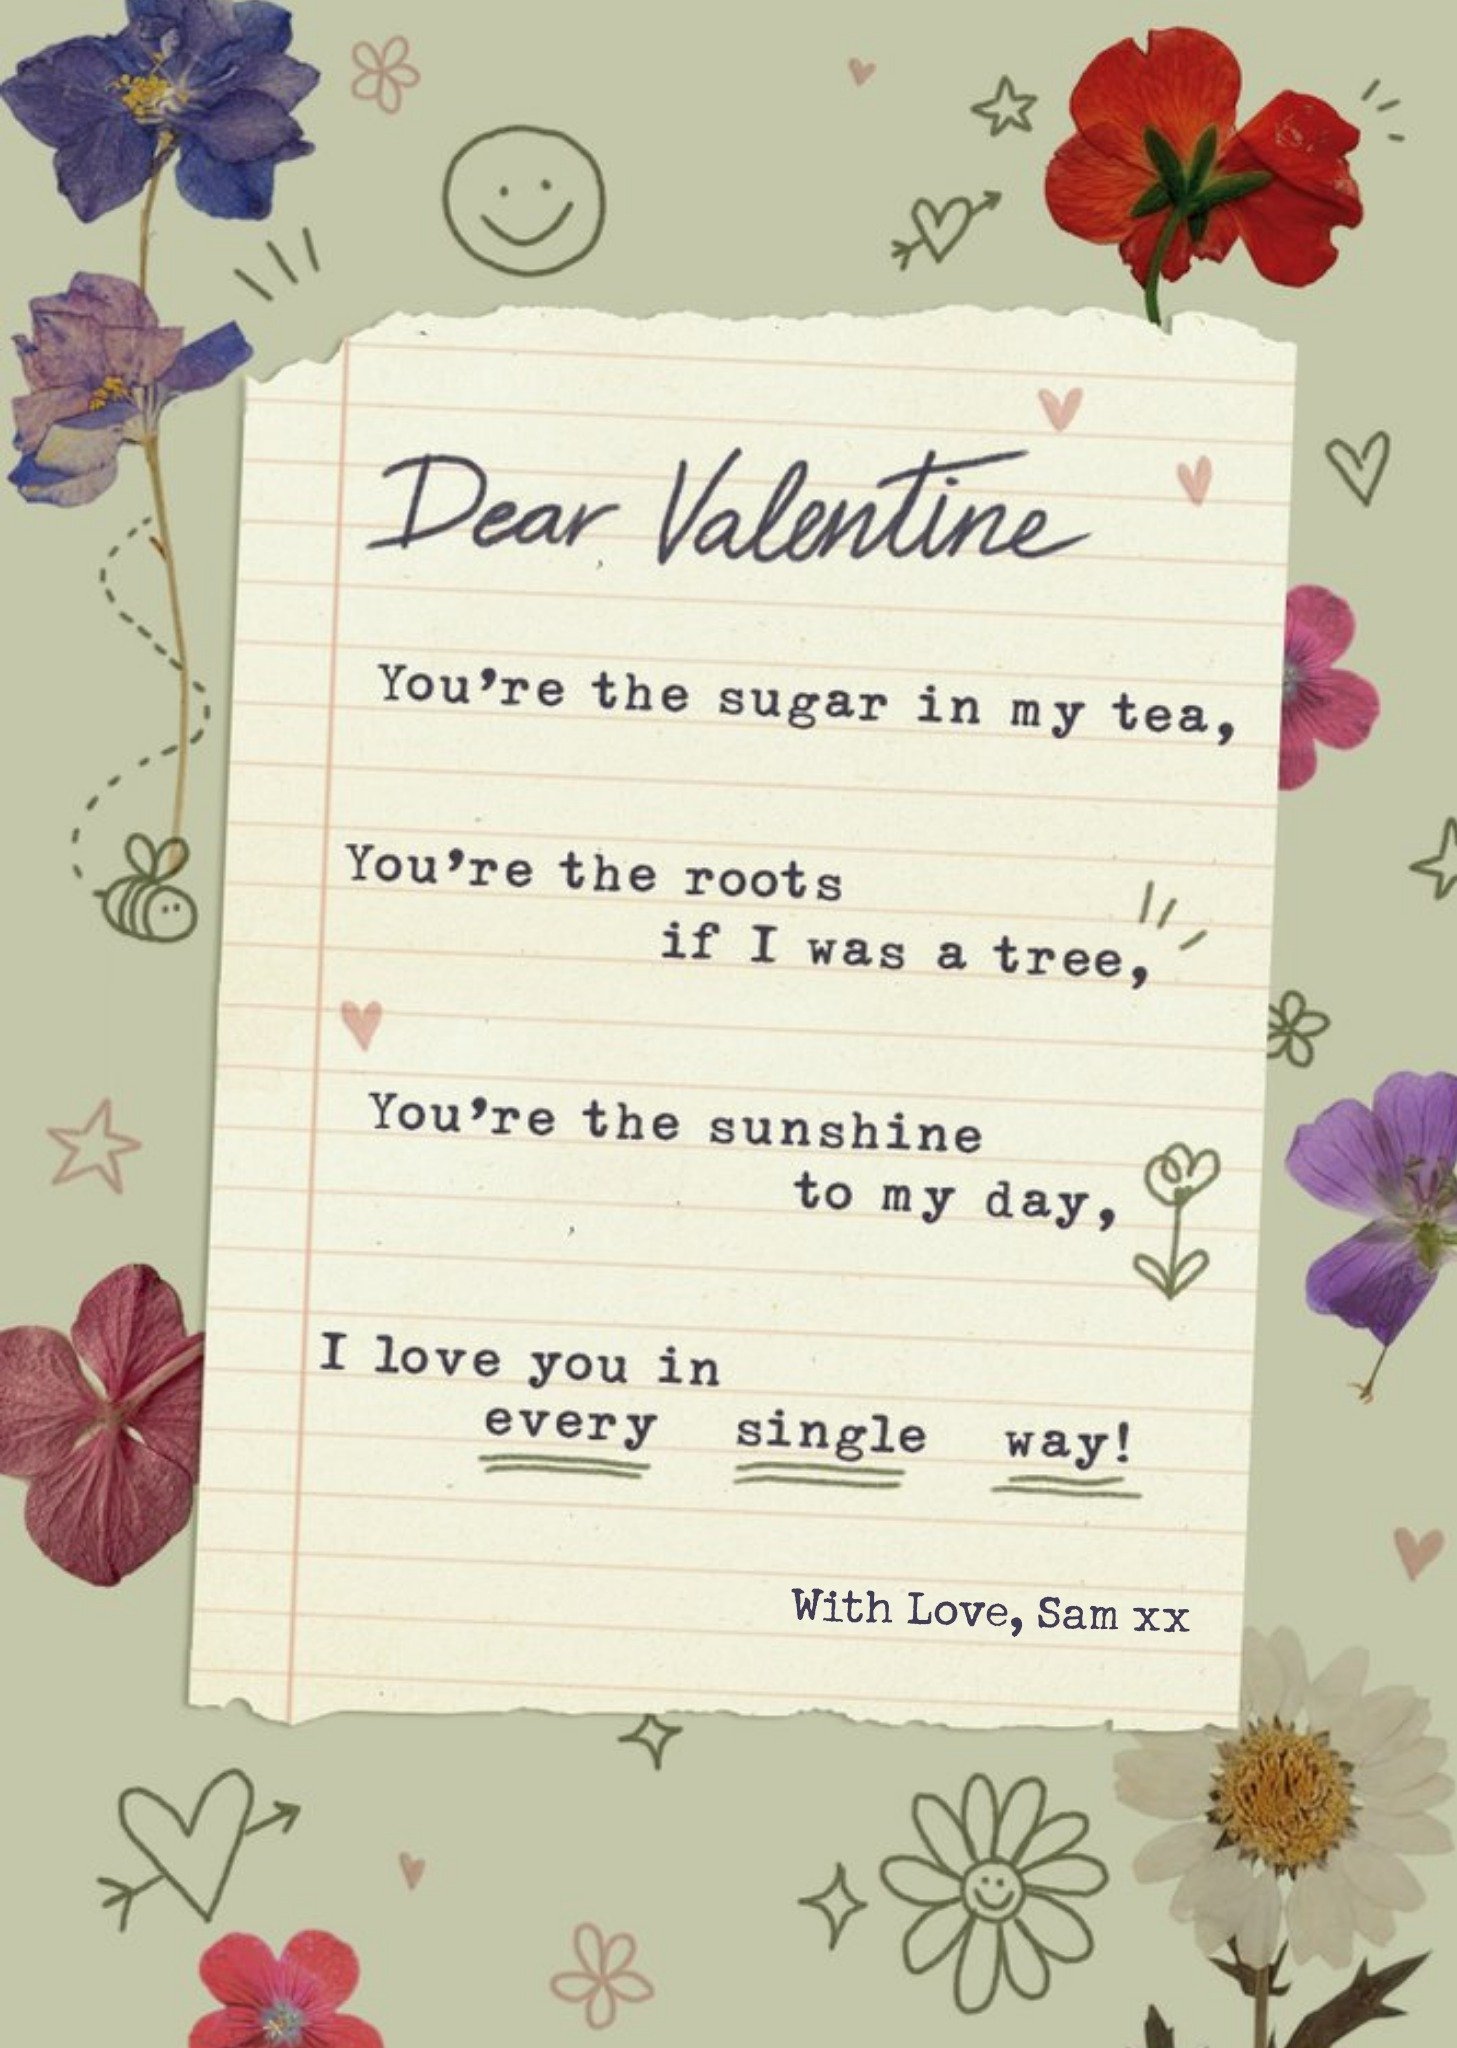 Moonpig Note Paper Surrounded By Flowers And Spot Illustrations Valentine's Day Card Ecard